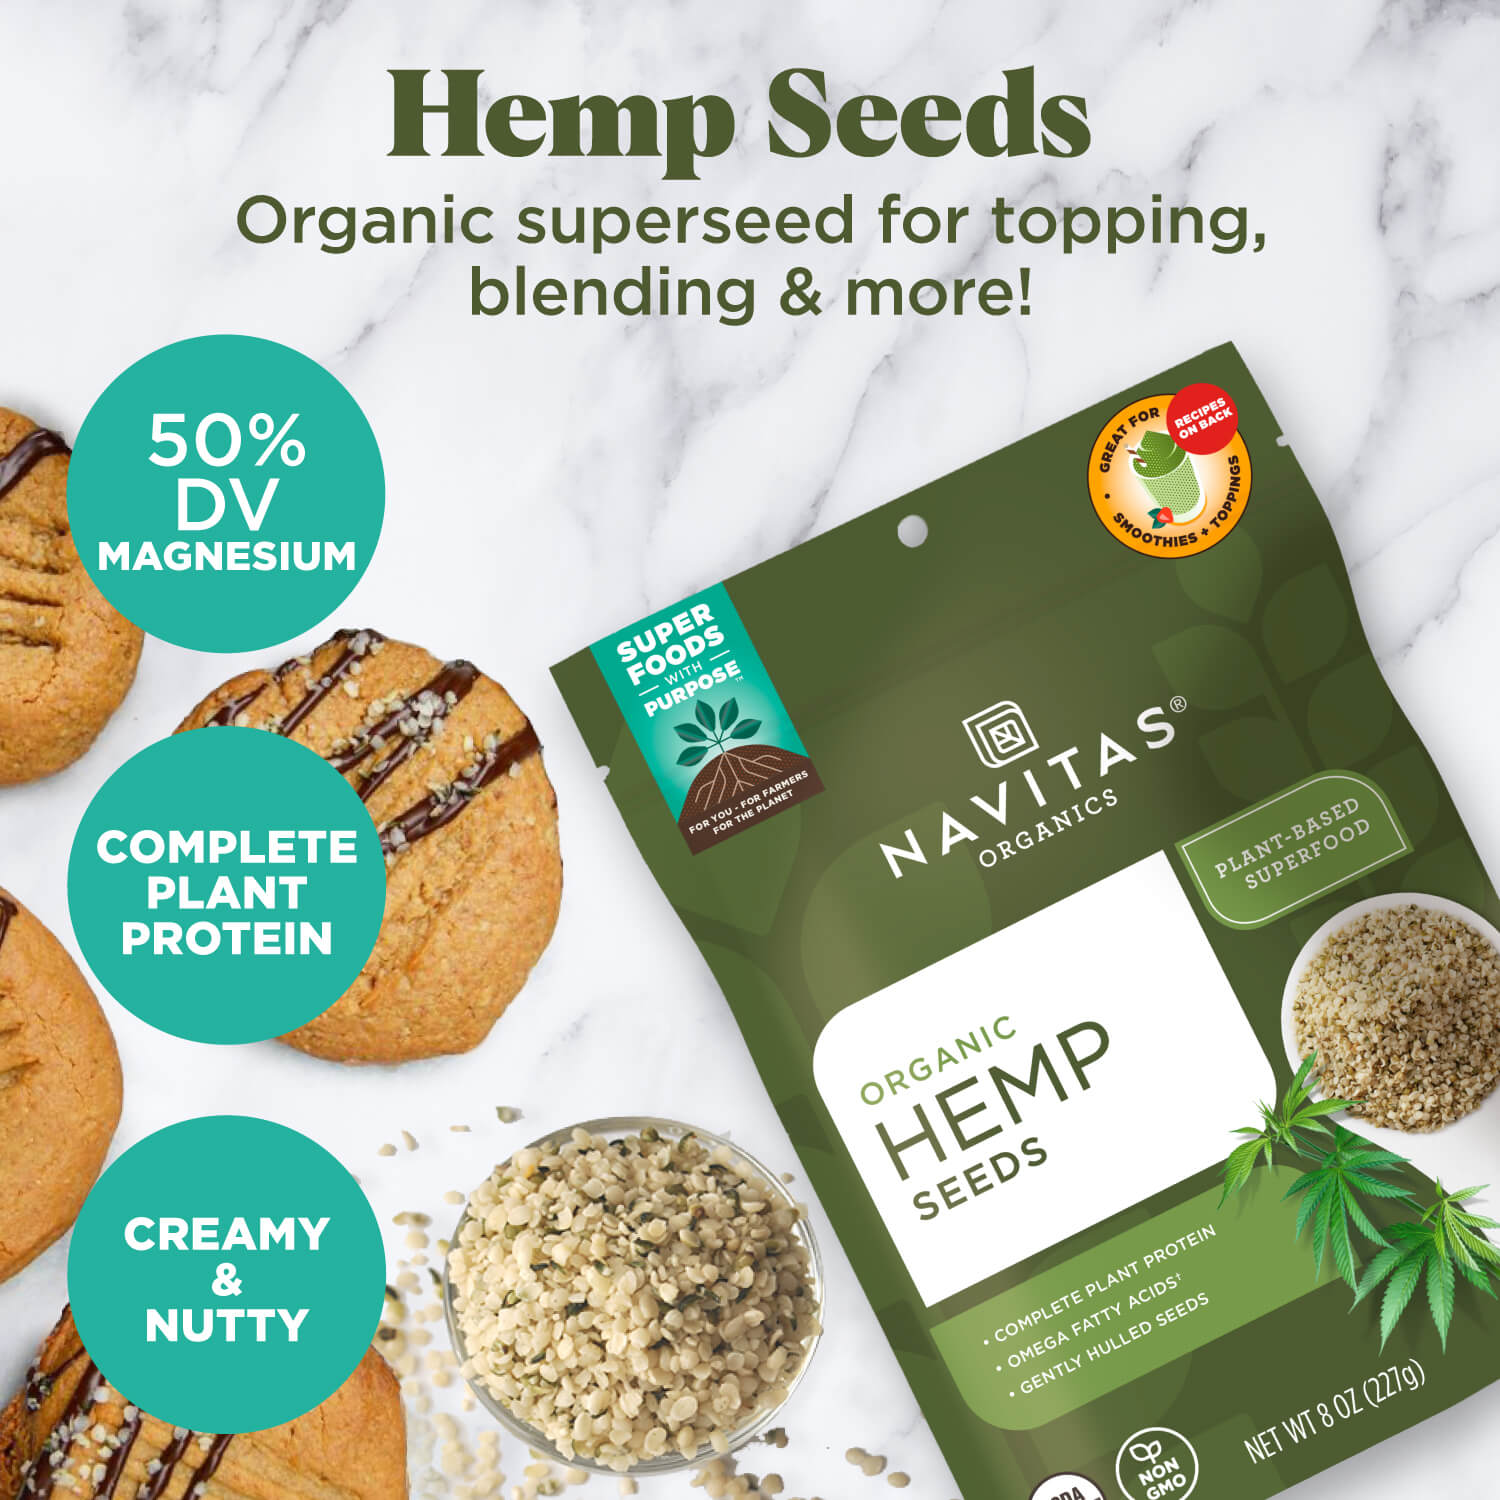 Navitas Organics Hemp Seeds are organic superseeds that are great for topping, blending and more!